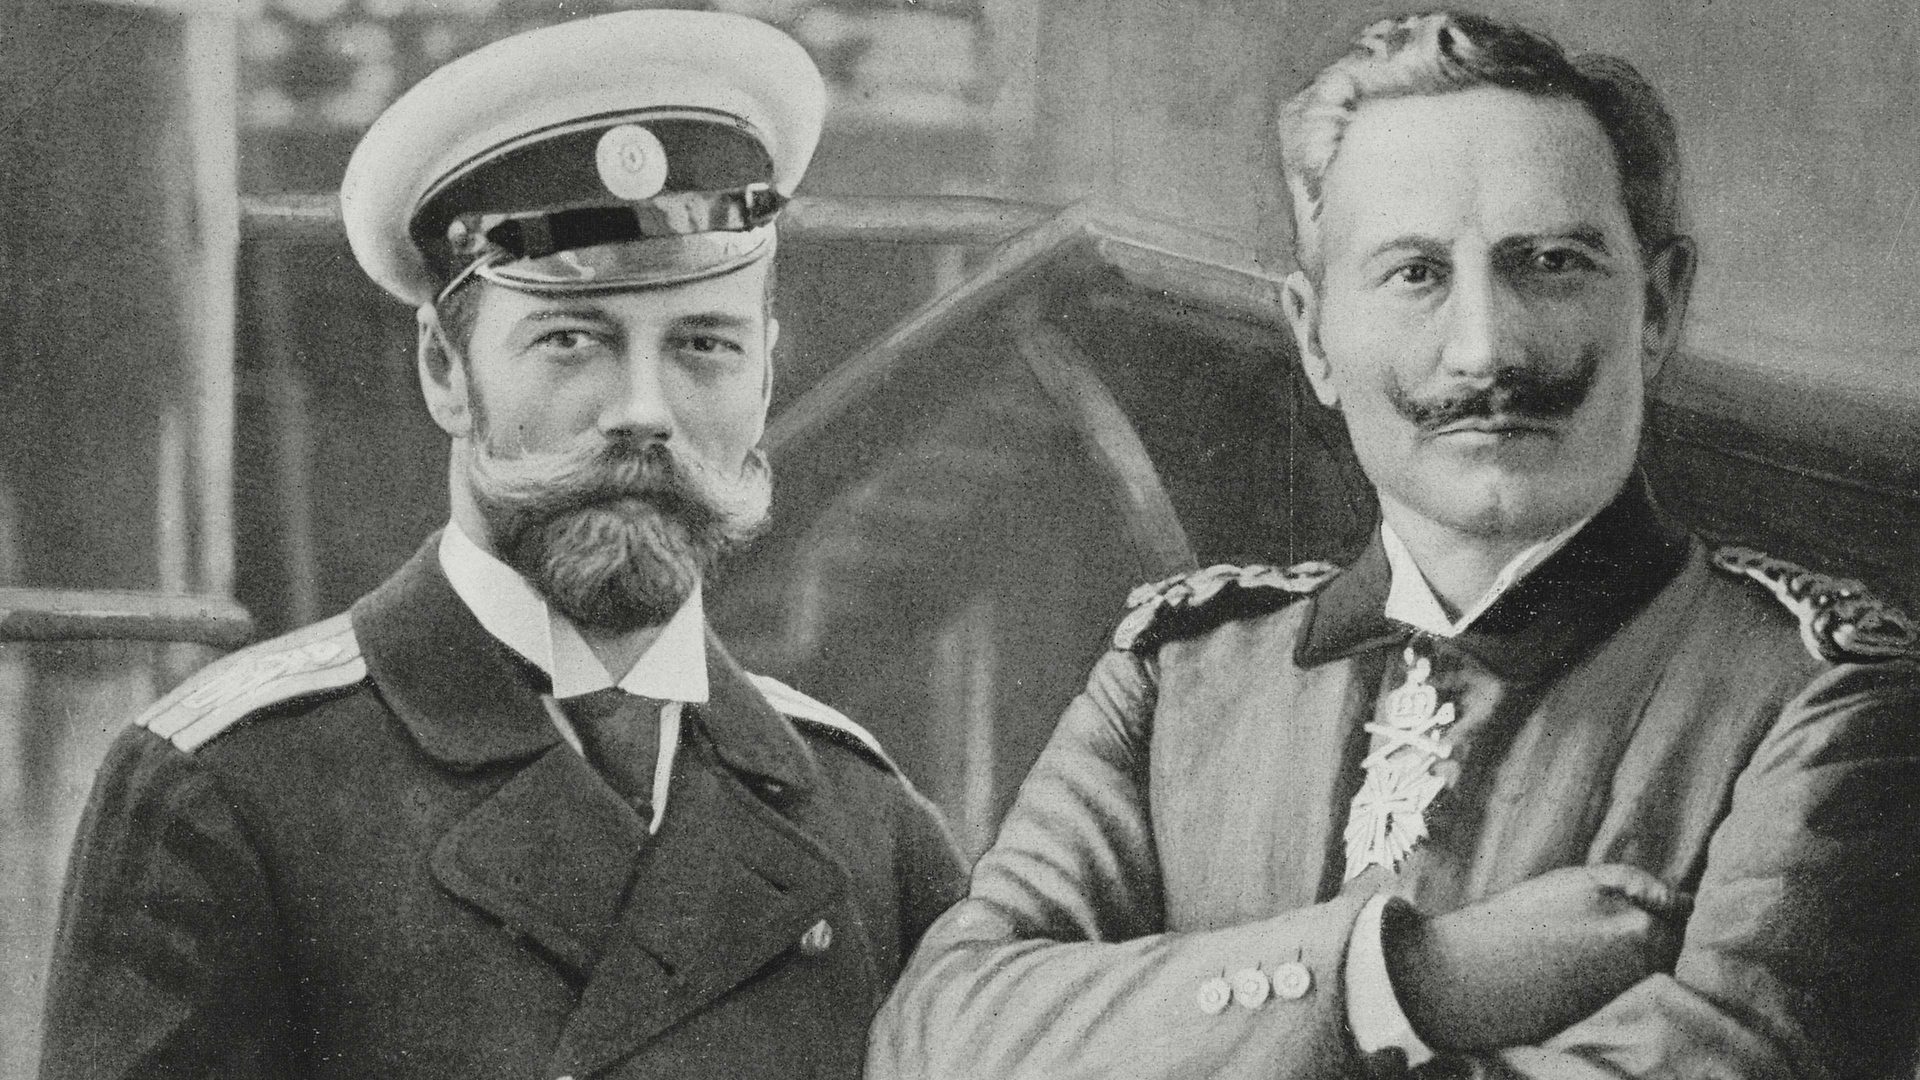 Tsar Nicholas II of Russia and Emperor Wilhelm II of Germany on the yacht Standart, during their meeting in Paldiski, July 4, 1912.